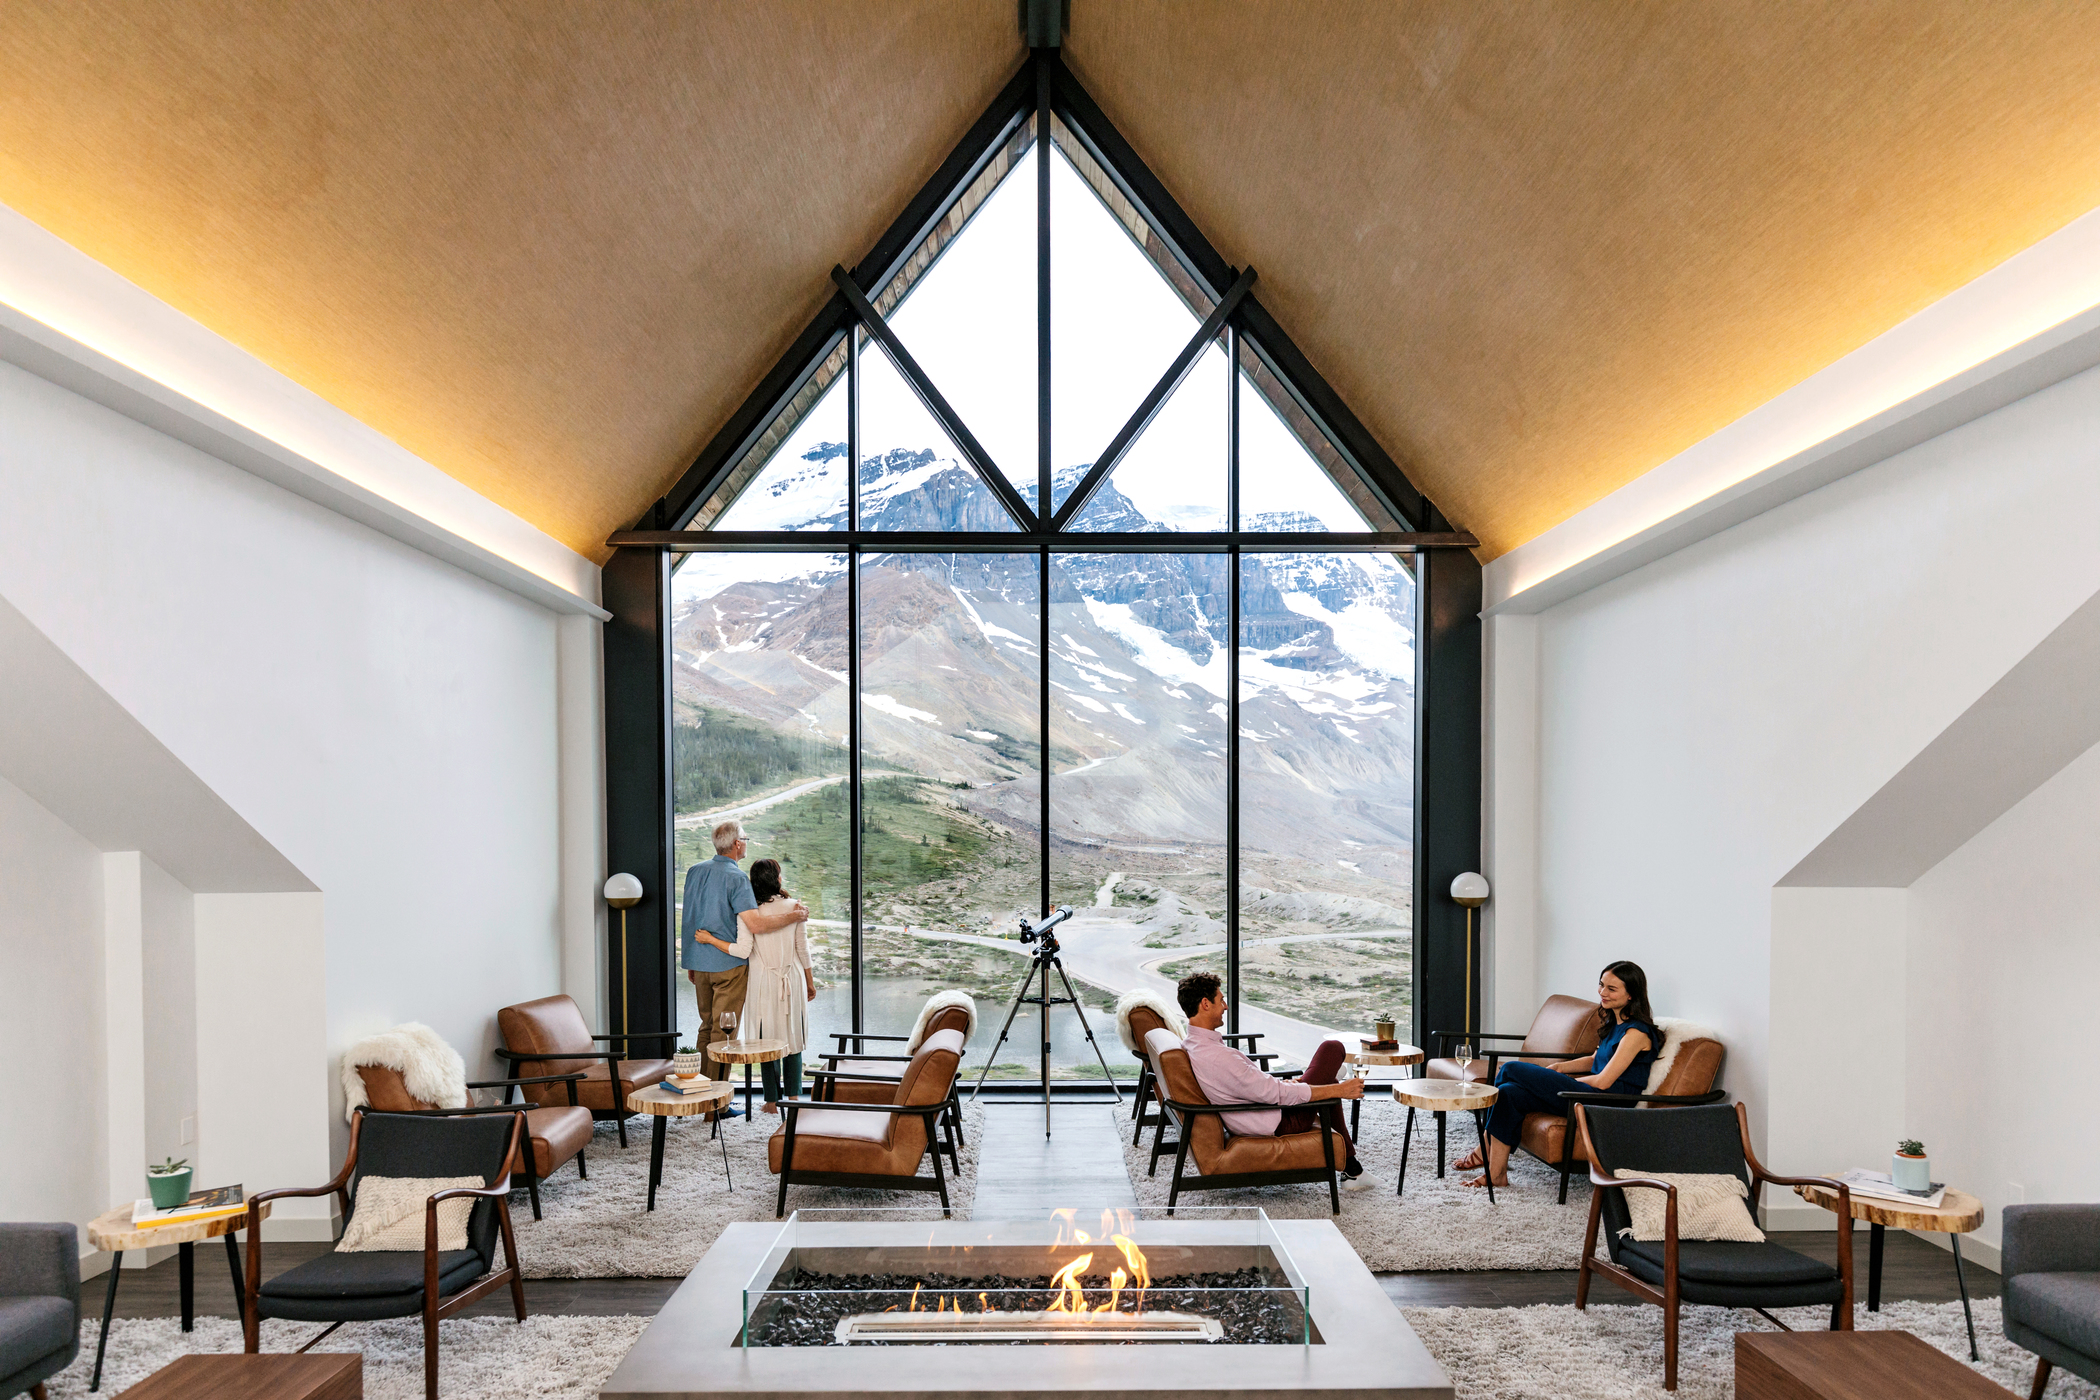 <Summer Limited> 7-Day Picturesque Glacier View Lodge, Iconic Columbia Icefield, In-depth Canadian Rockies Tour